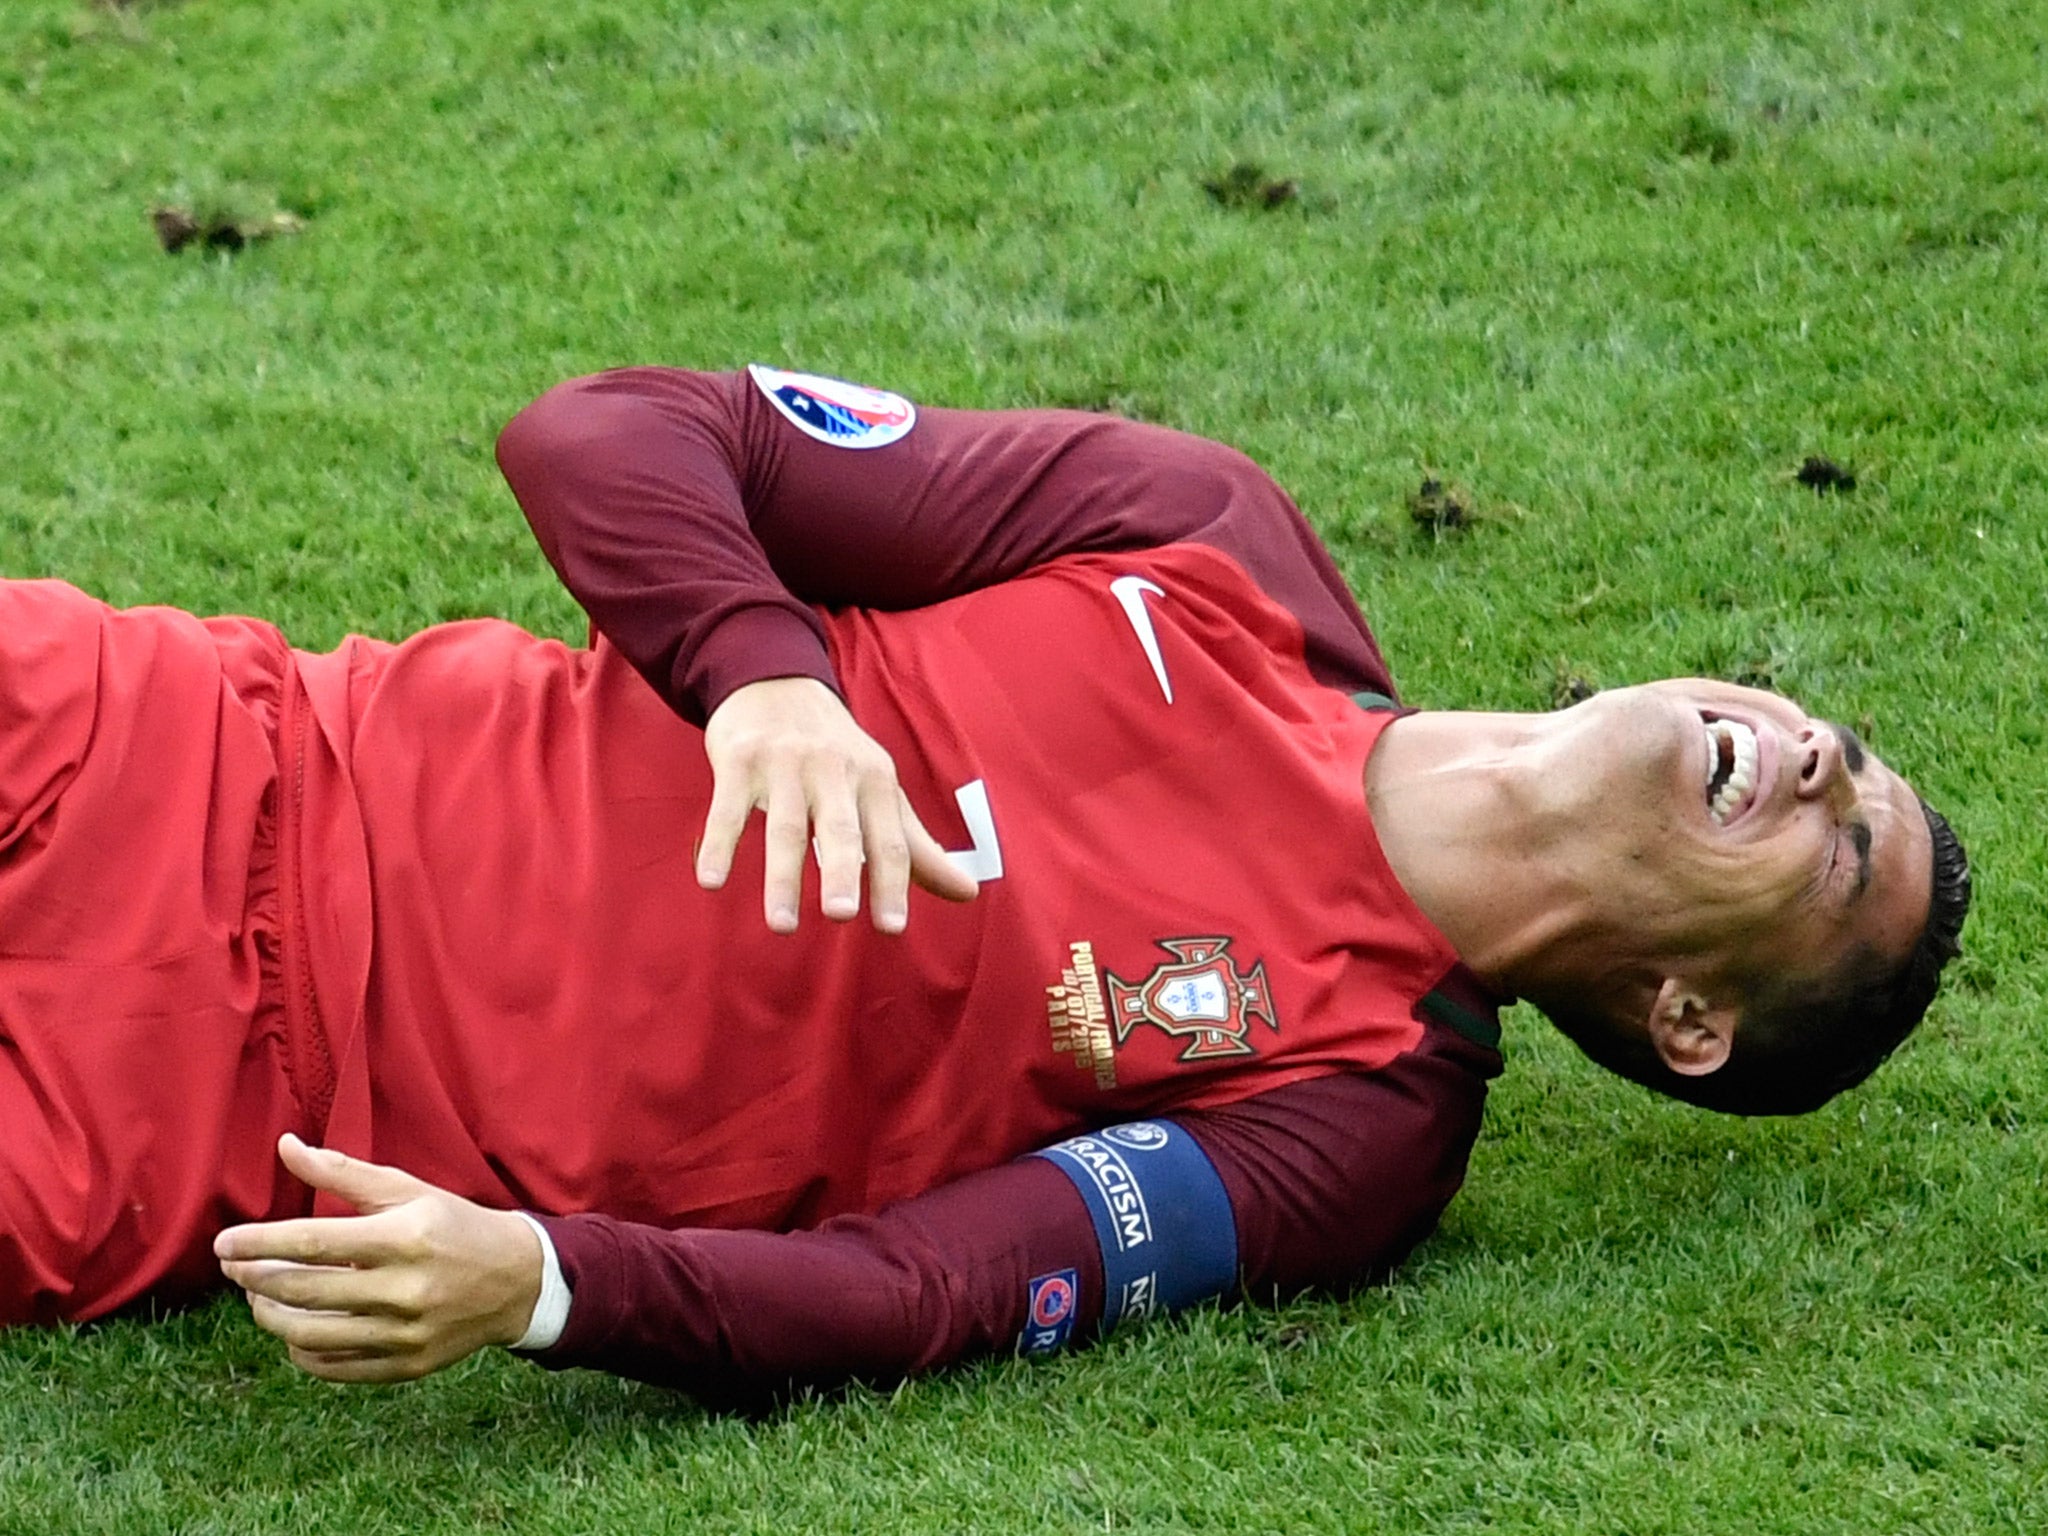 Cristiano Ronaldo had to be substituted in the Euro 2016 final after suffering a knee injury